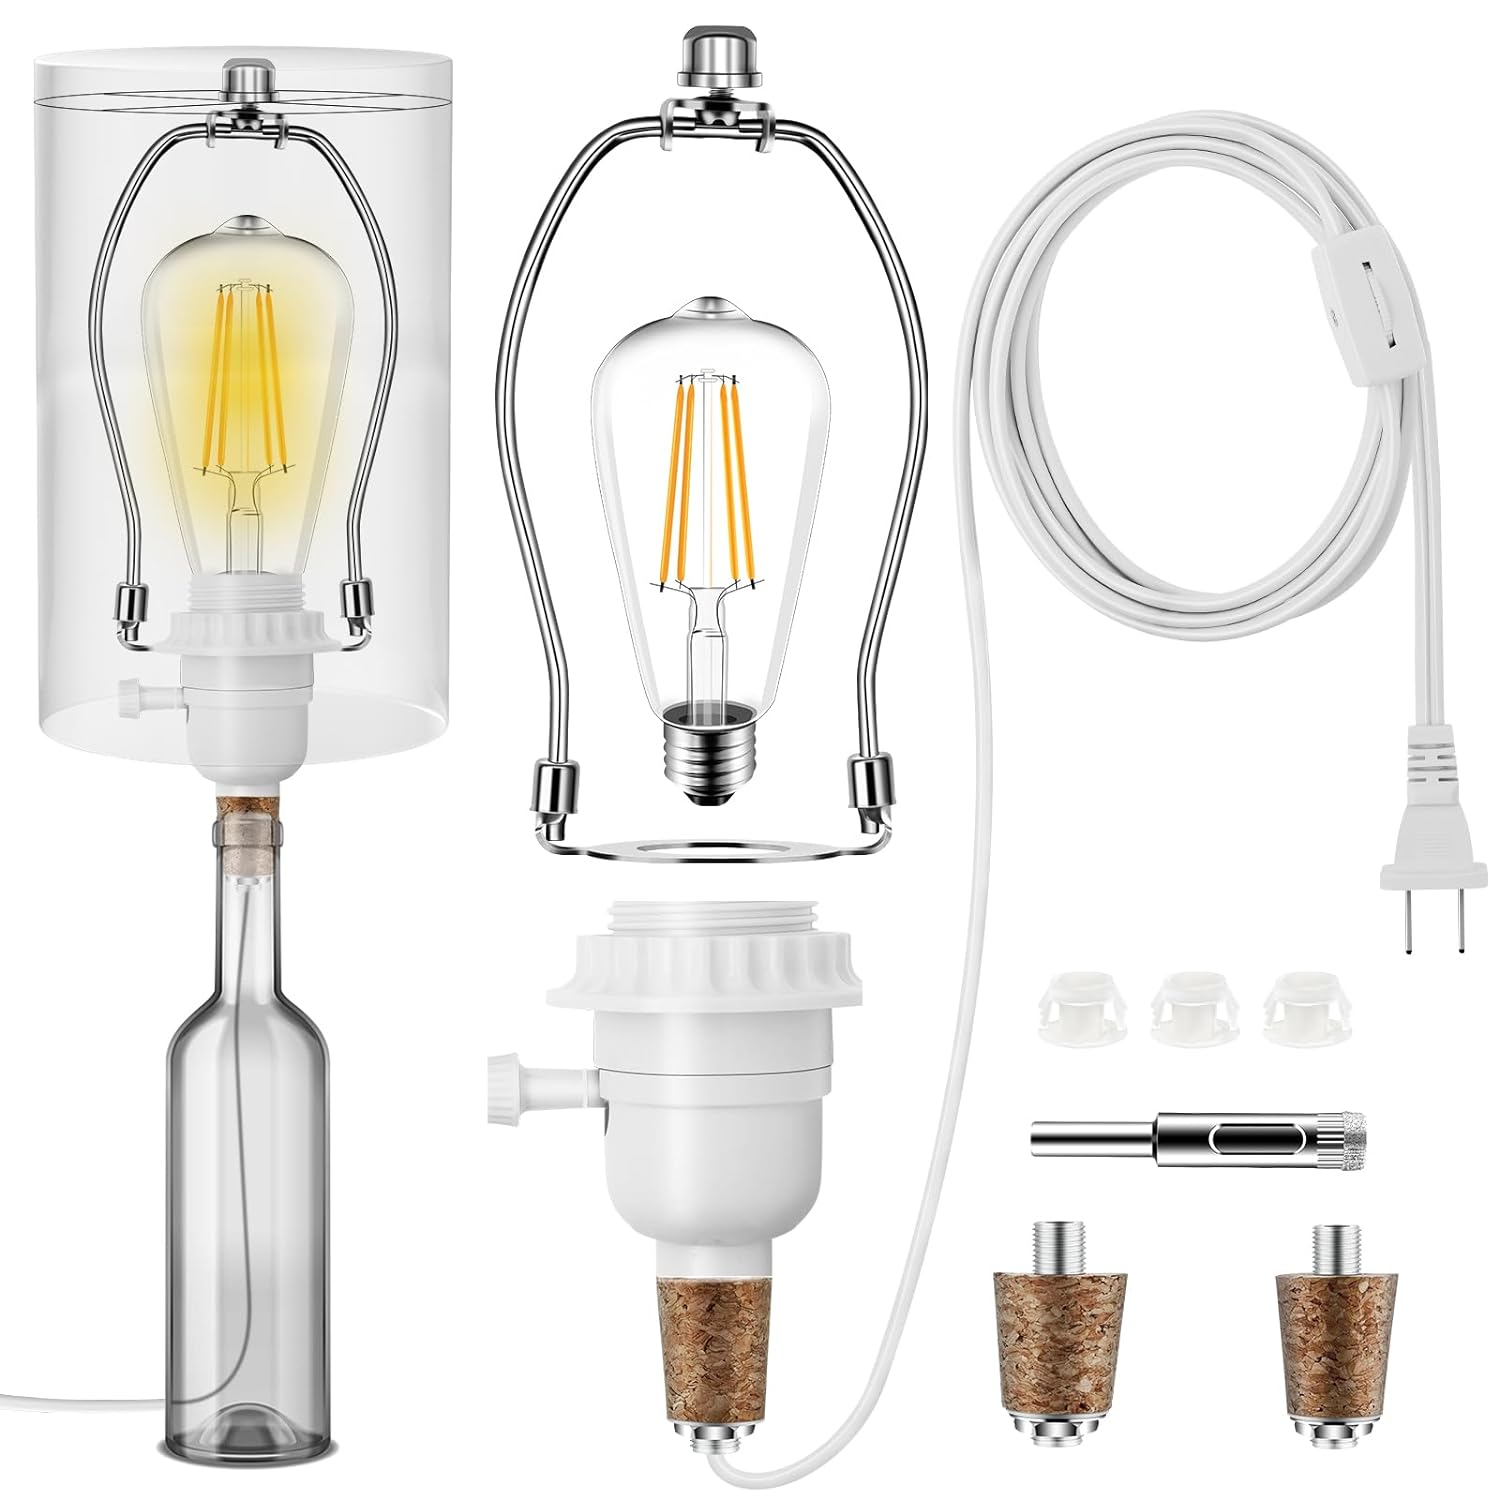 Make a Lamp or Rewire Kit,DIY Bottle Lamp Wiring Kit Includes lamp Bulb,3-Way Light Socket,Electric Cord,Glass Drill Bit,Bottle Corks etc., All Essential Hardware Set for Bottle Lamp Design or Repair